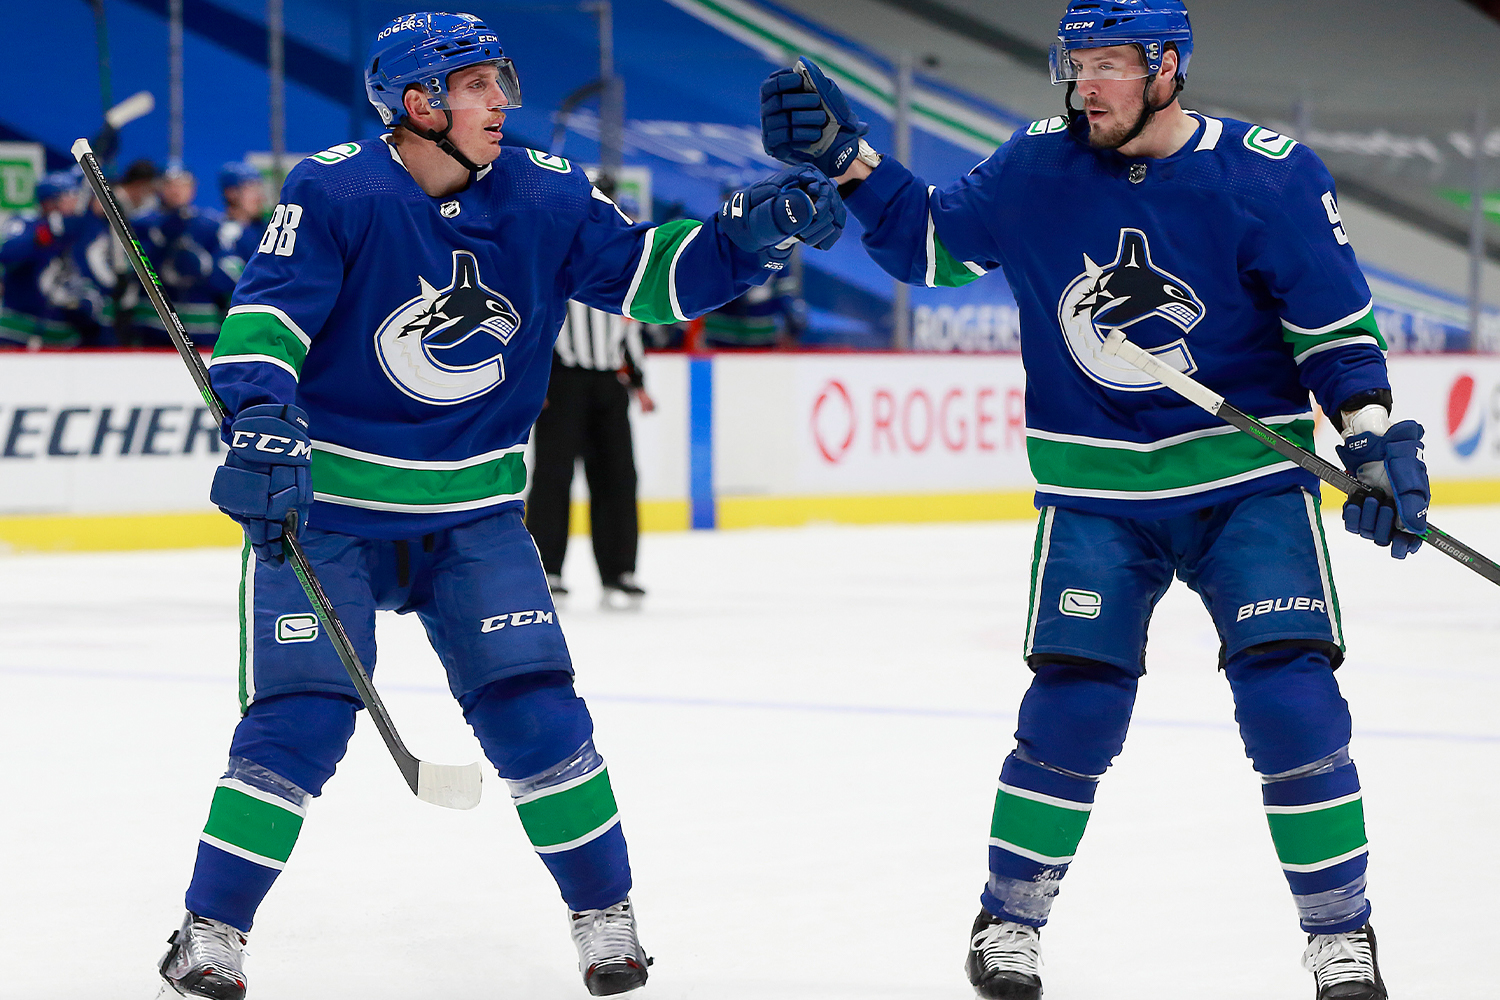 Nate Schmidt #88 of the Vancouver Canucks is congratulated by teammate J.T. Miller #9 after scoring during their NHL game against the Edmonton Oilers at Rogers Arena on May 4, 2021